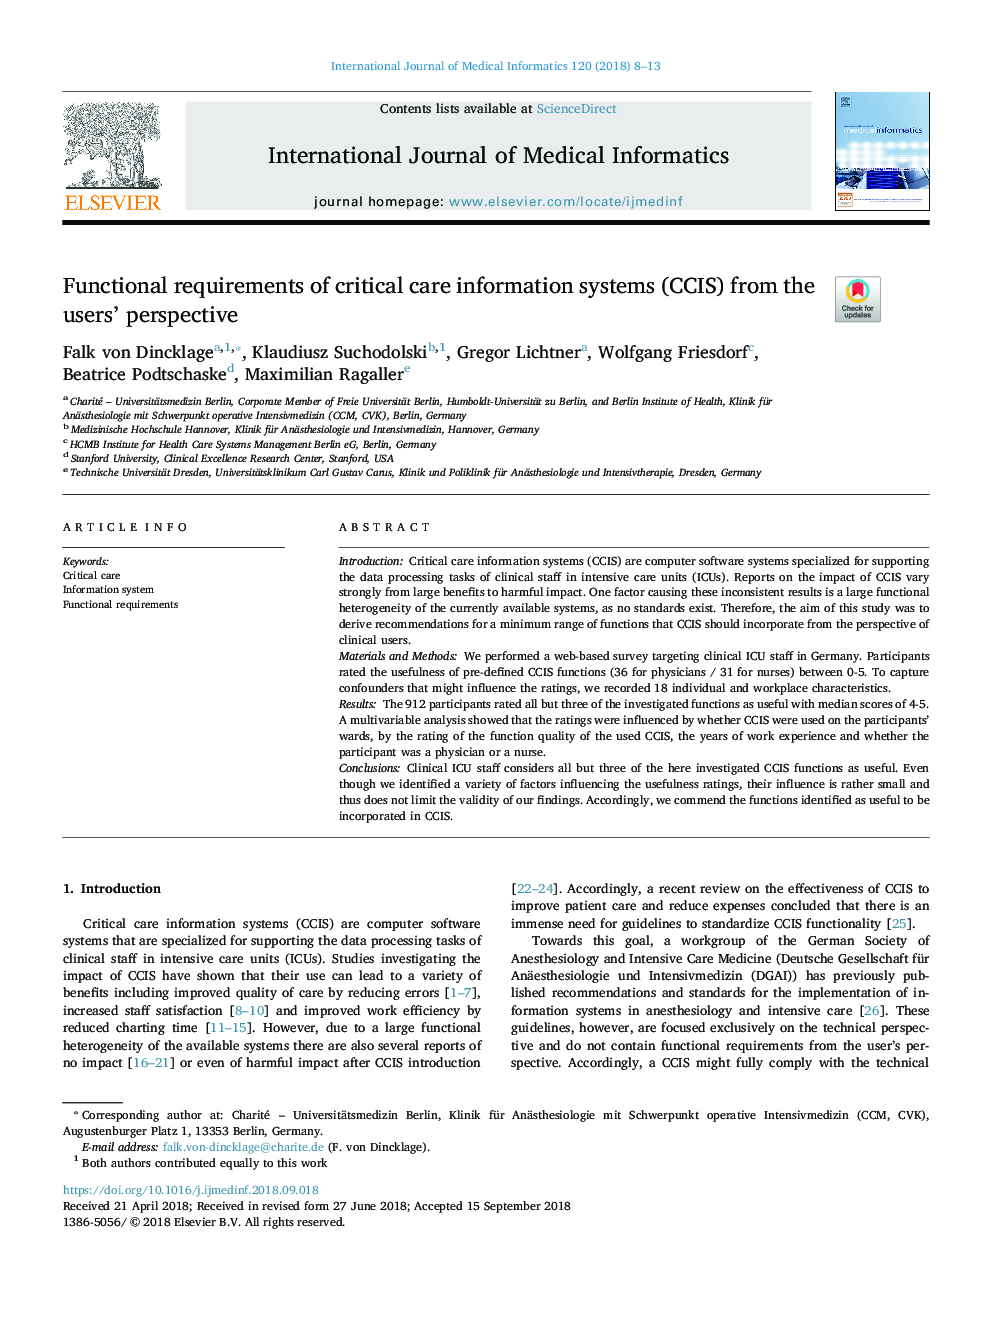 Functional requirements of critical care information systems (CCIS) from the users' perspective